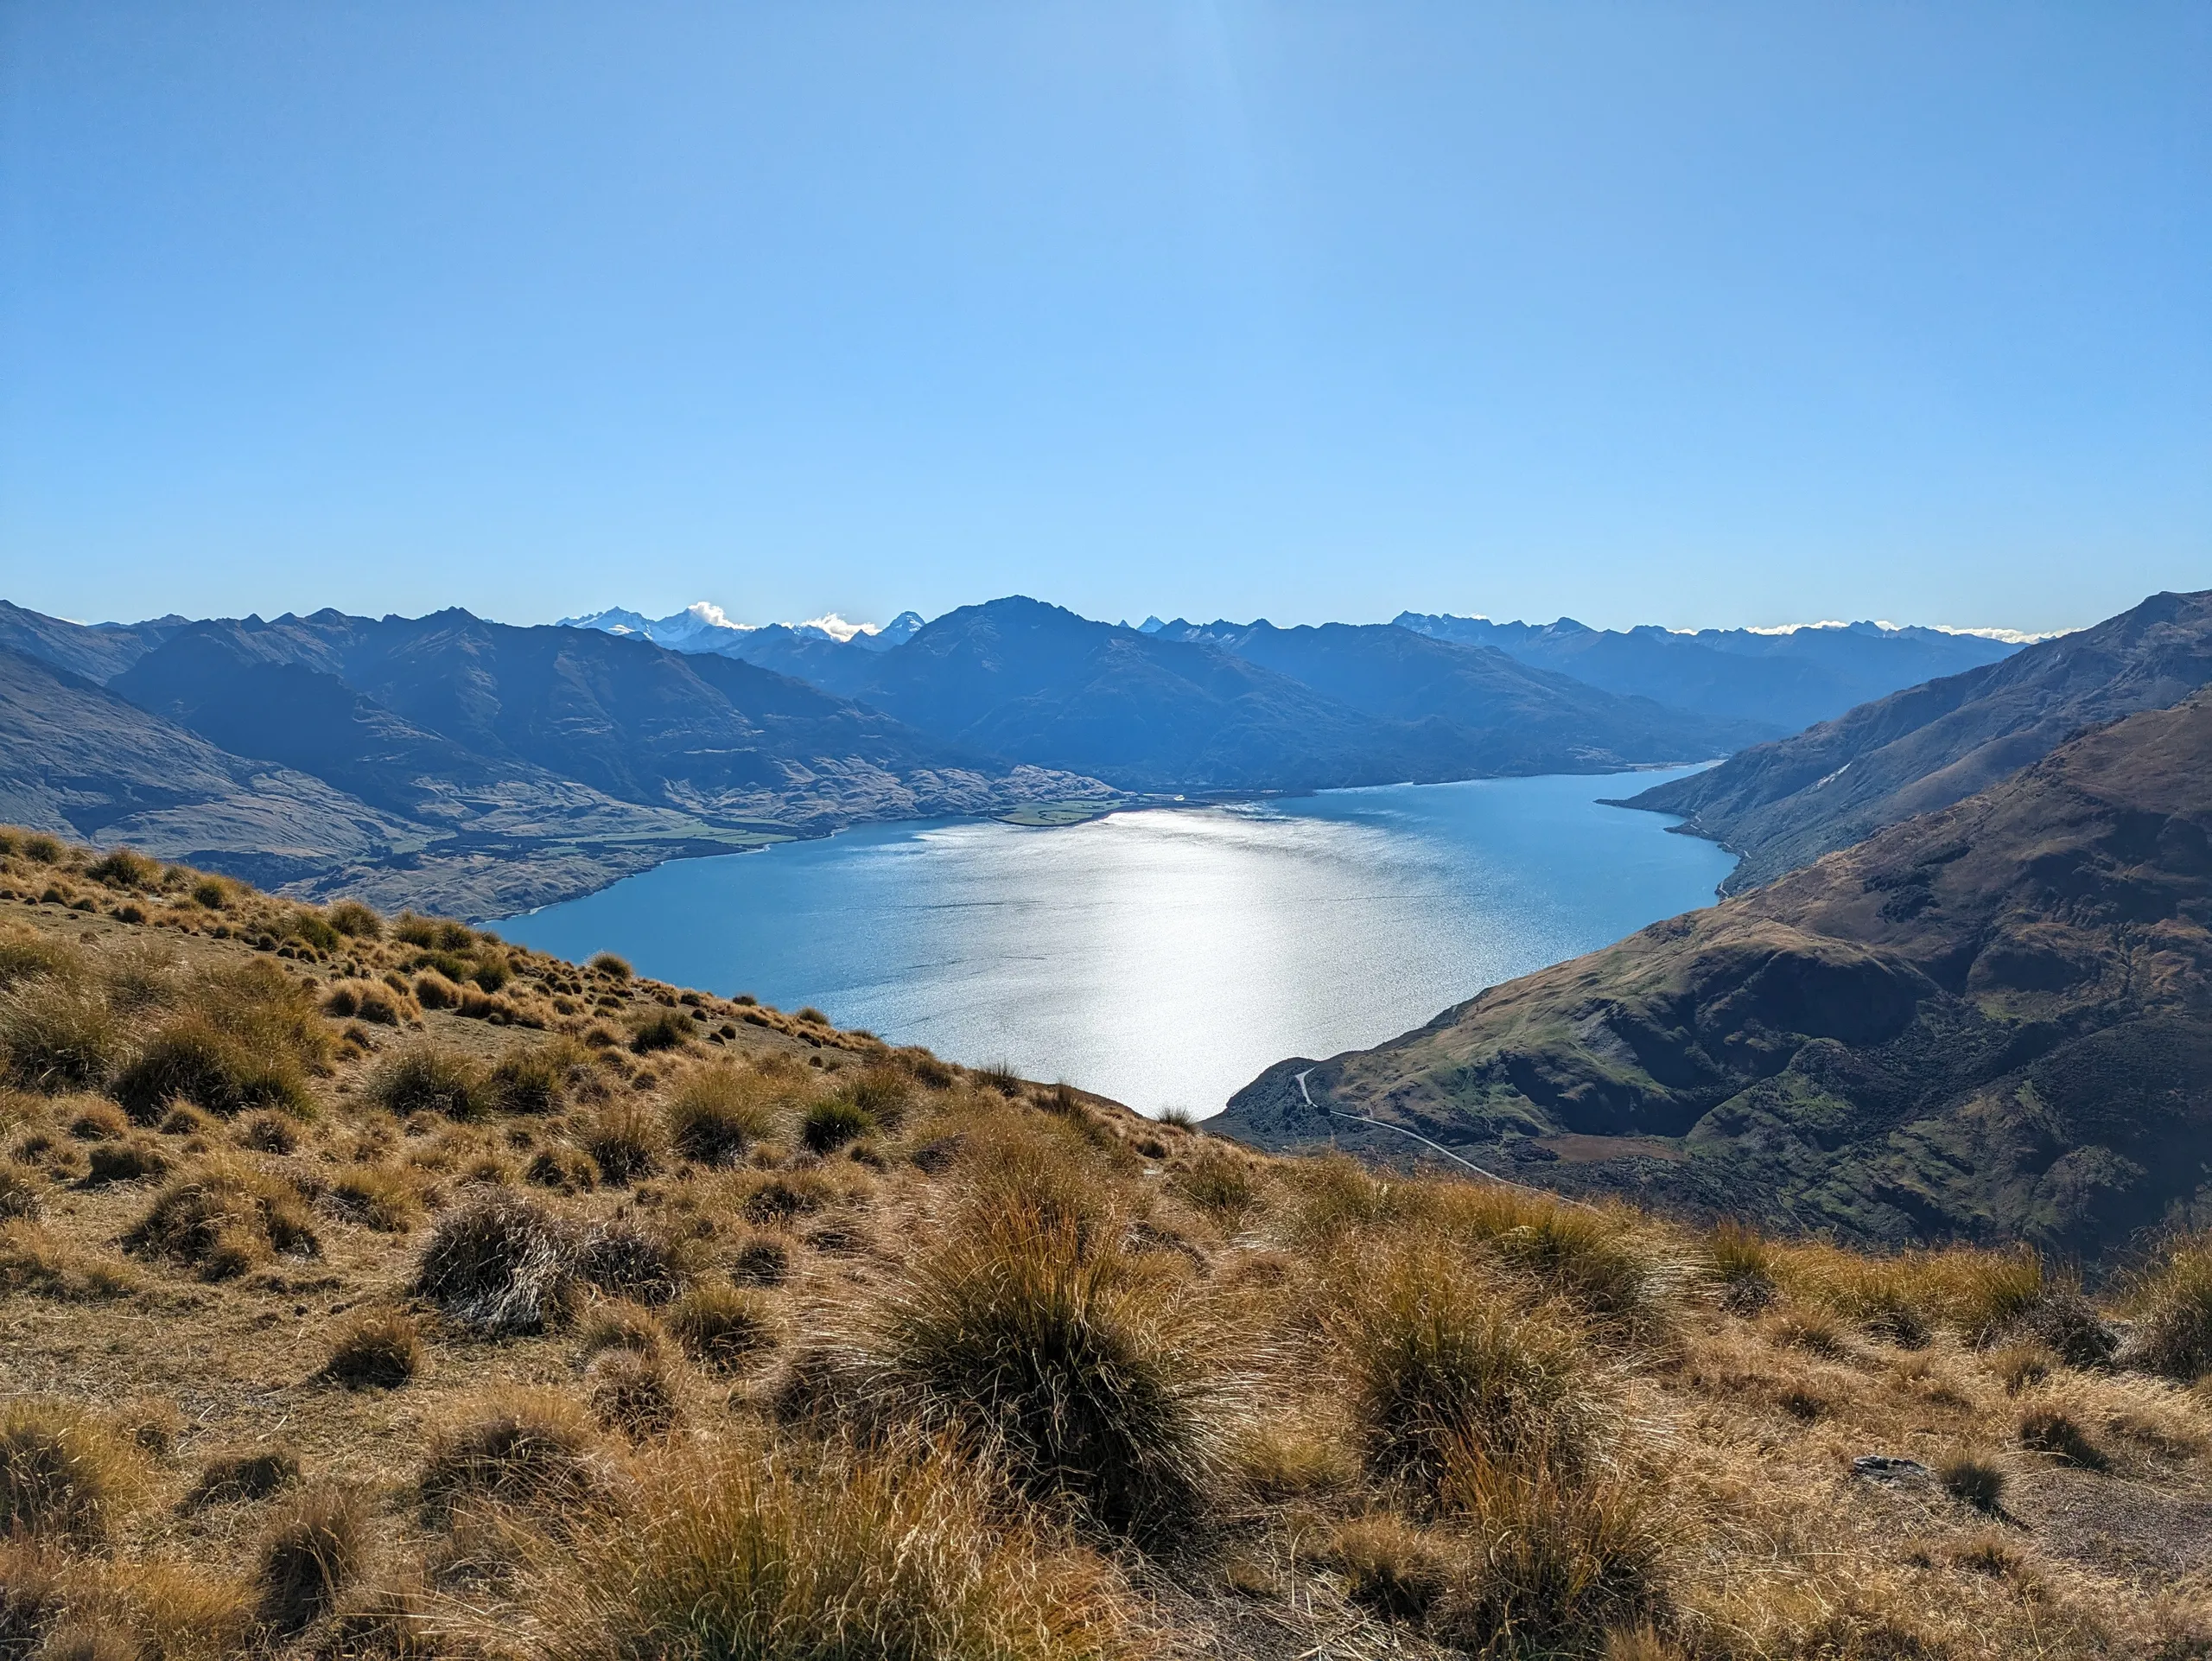 Looking north from the summit over Lake Wānaka towards Mt Albert and the Makarora River